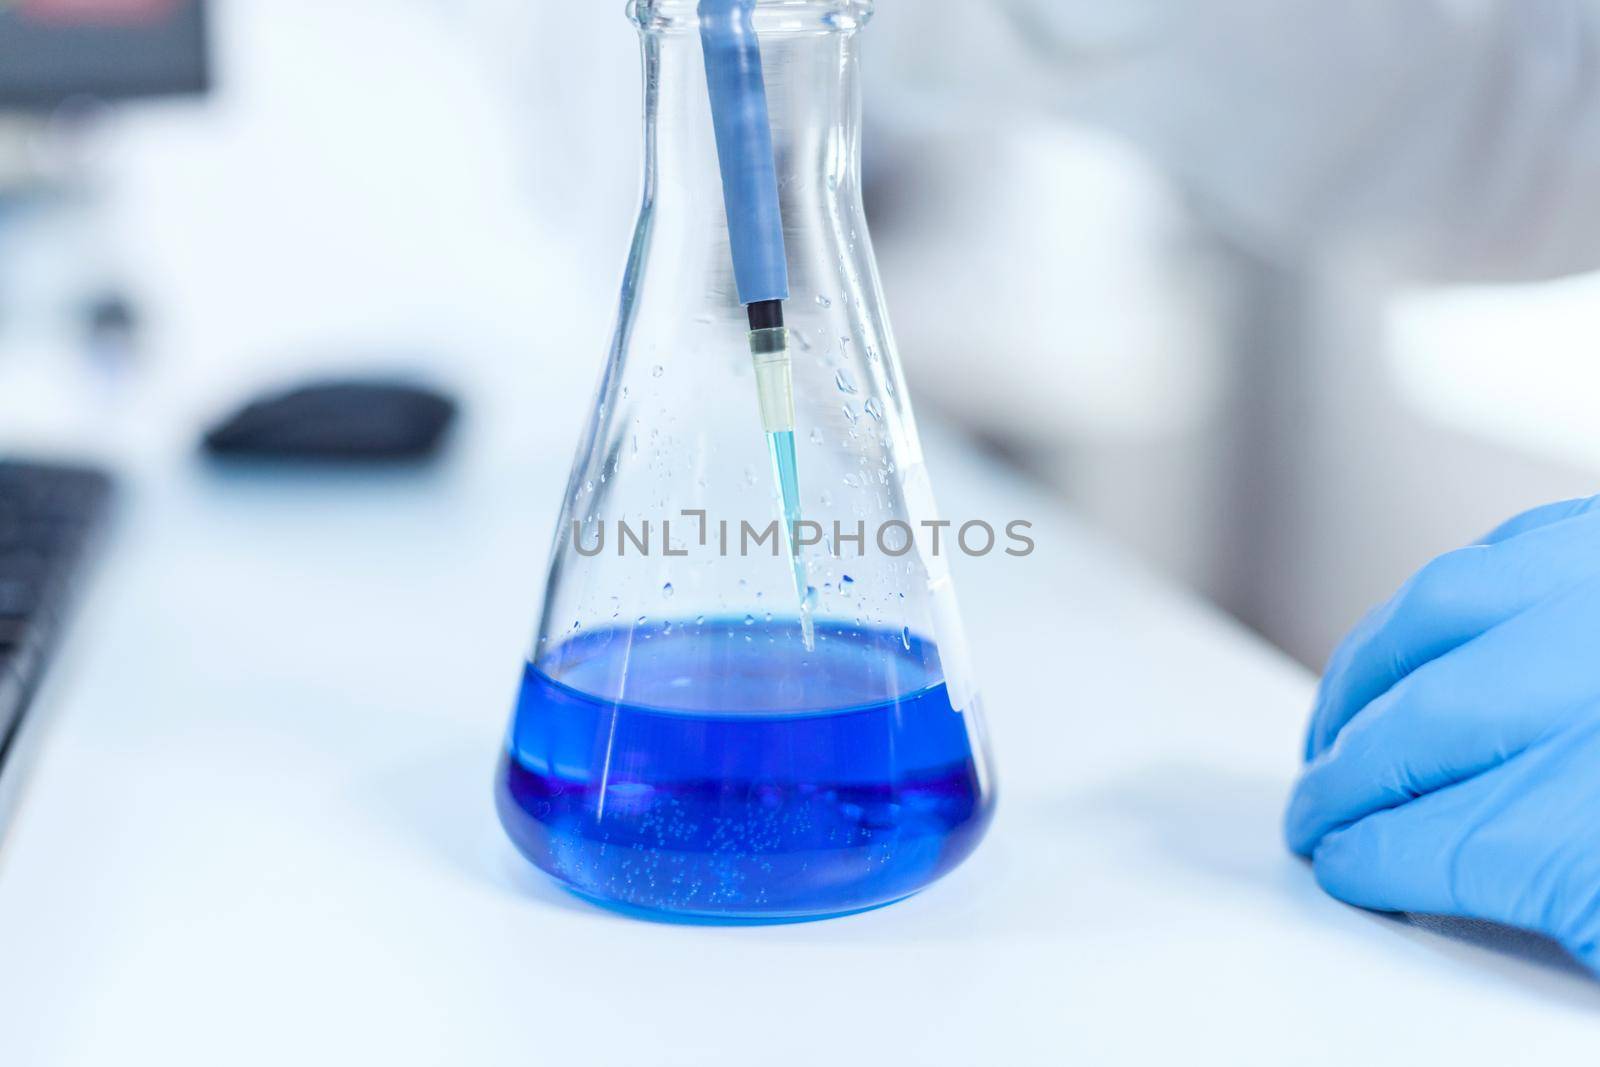 Employee of the scientific laboratory examining the liquid in a laboratory flask using dropper. Senior professional chemist using pippete with blue solution for microbiology tests.